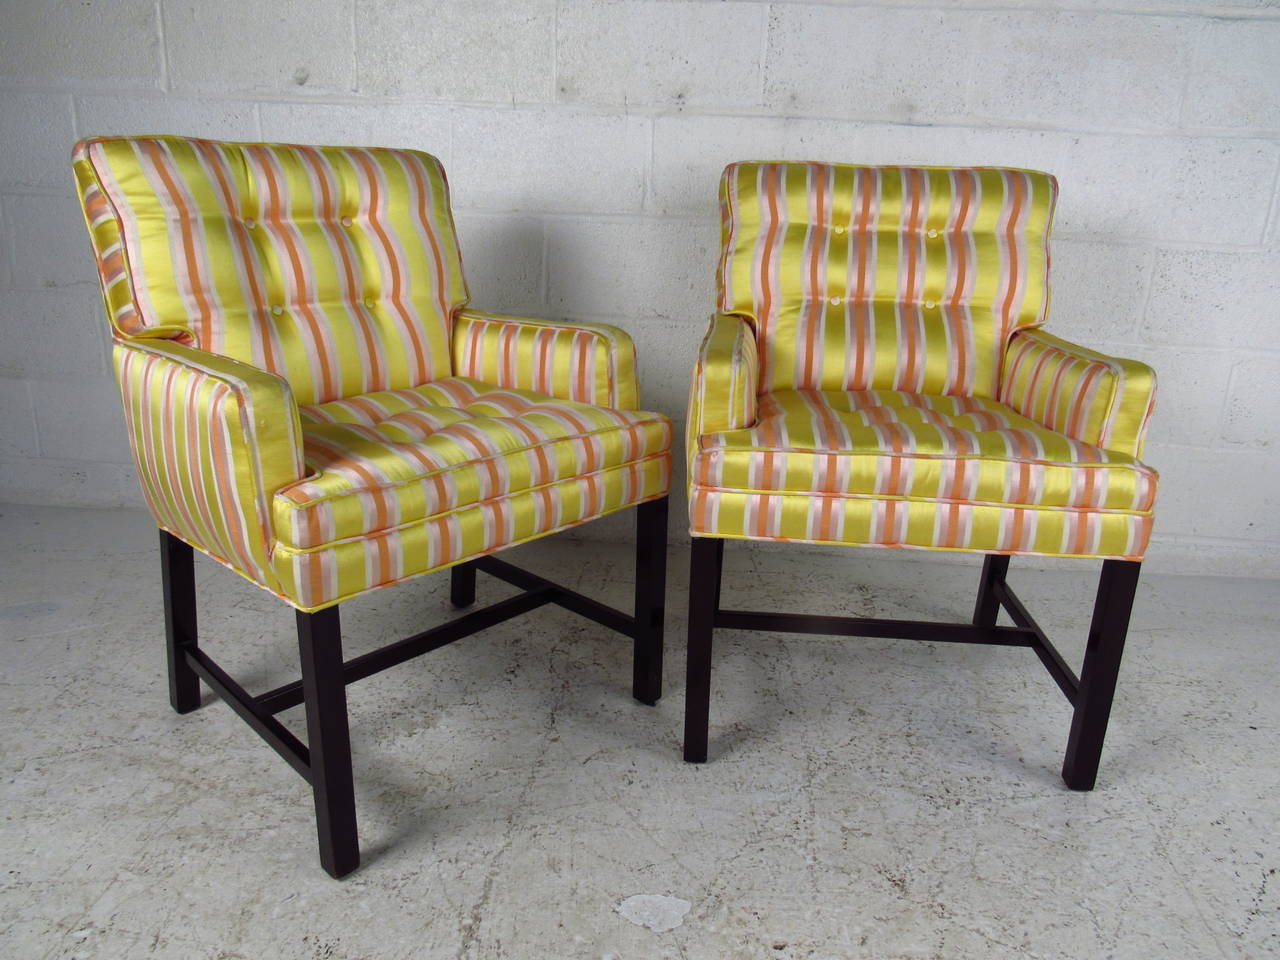 This pair of smaller scale tufted armchairs feature the wonderful mid century design of Dunbar, sport unique tufted seat backs, and have added stretchers for support. Unique size for smaller areas or children's room, please confirm item location (NY